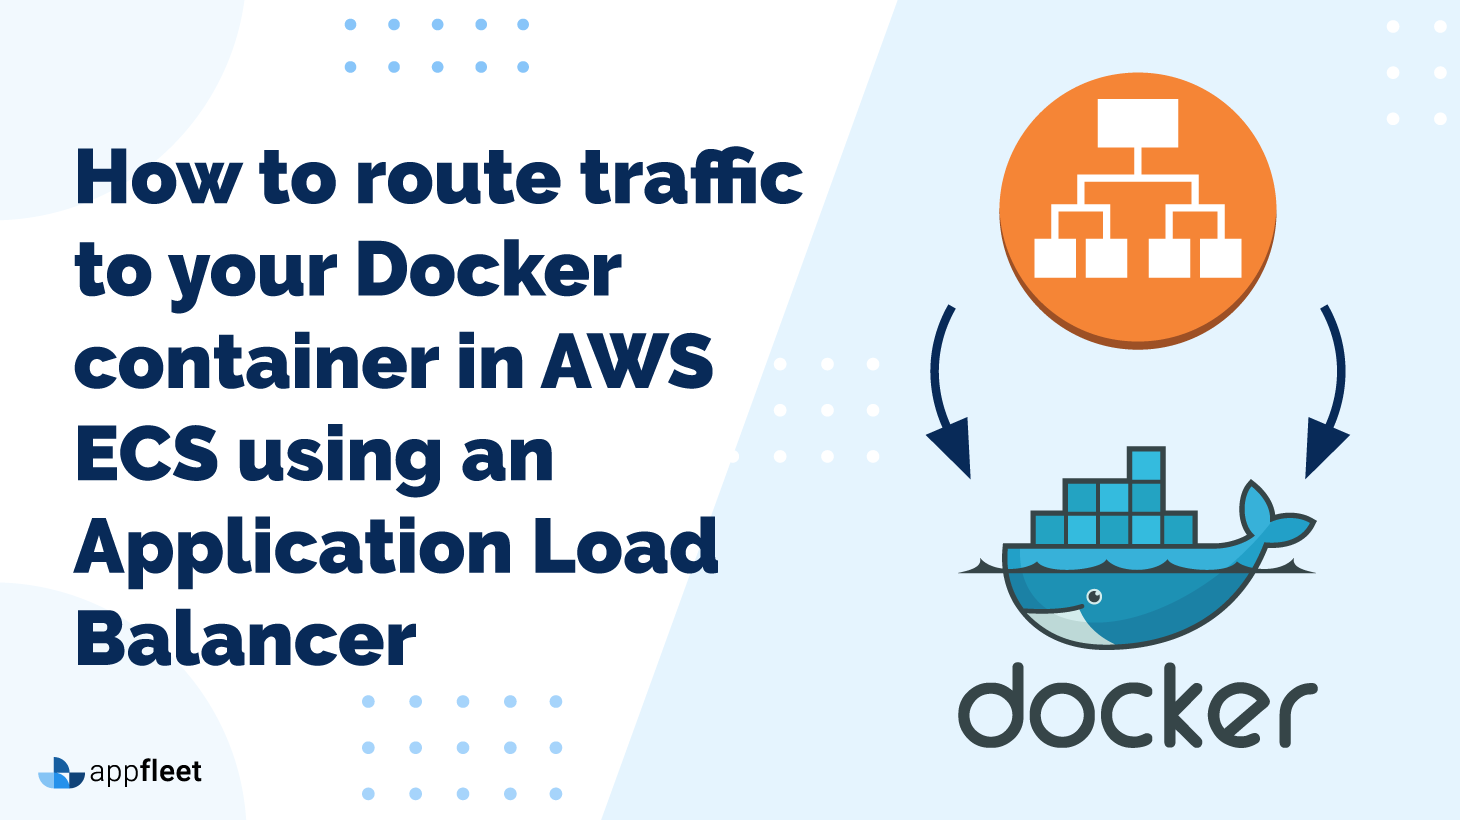 How to route traffic to your Docker container in AWS ECS using an